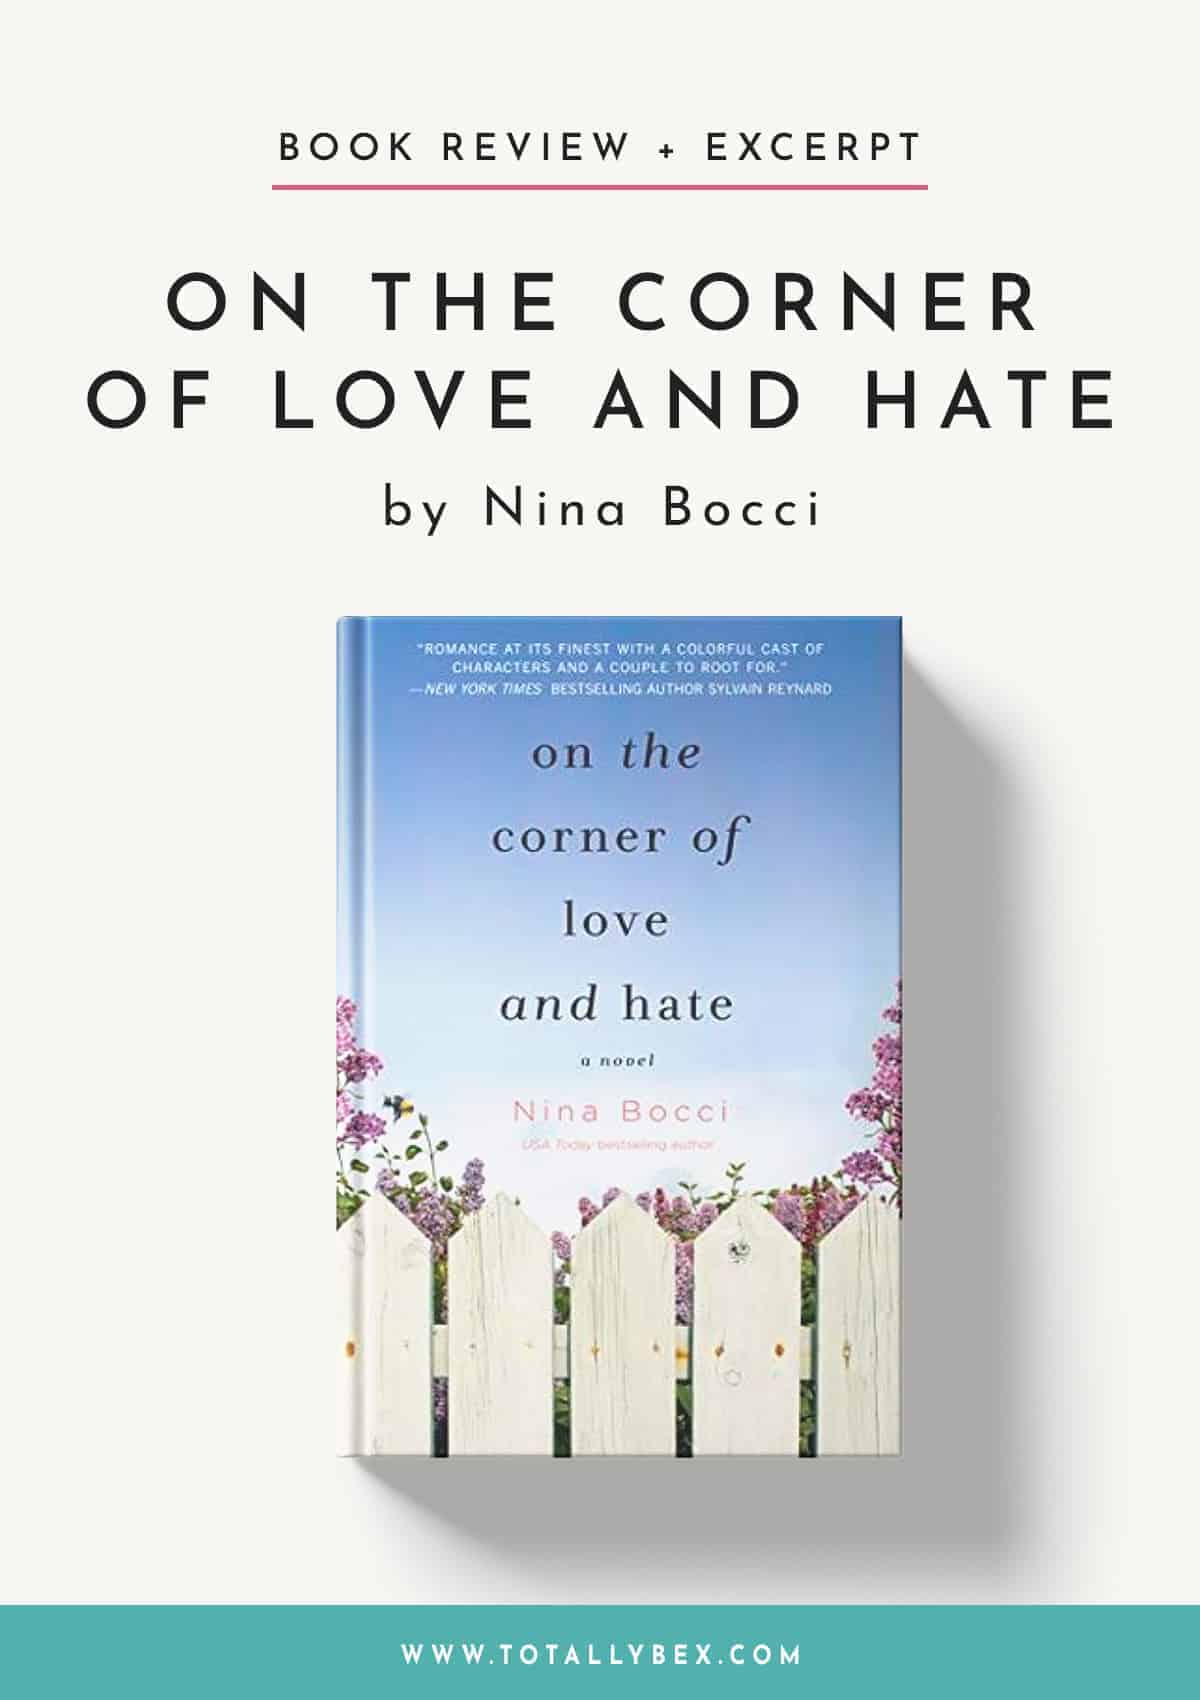 On the Corner of Love and Hate by Nina Bocci-Book Review+Excerpt